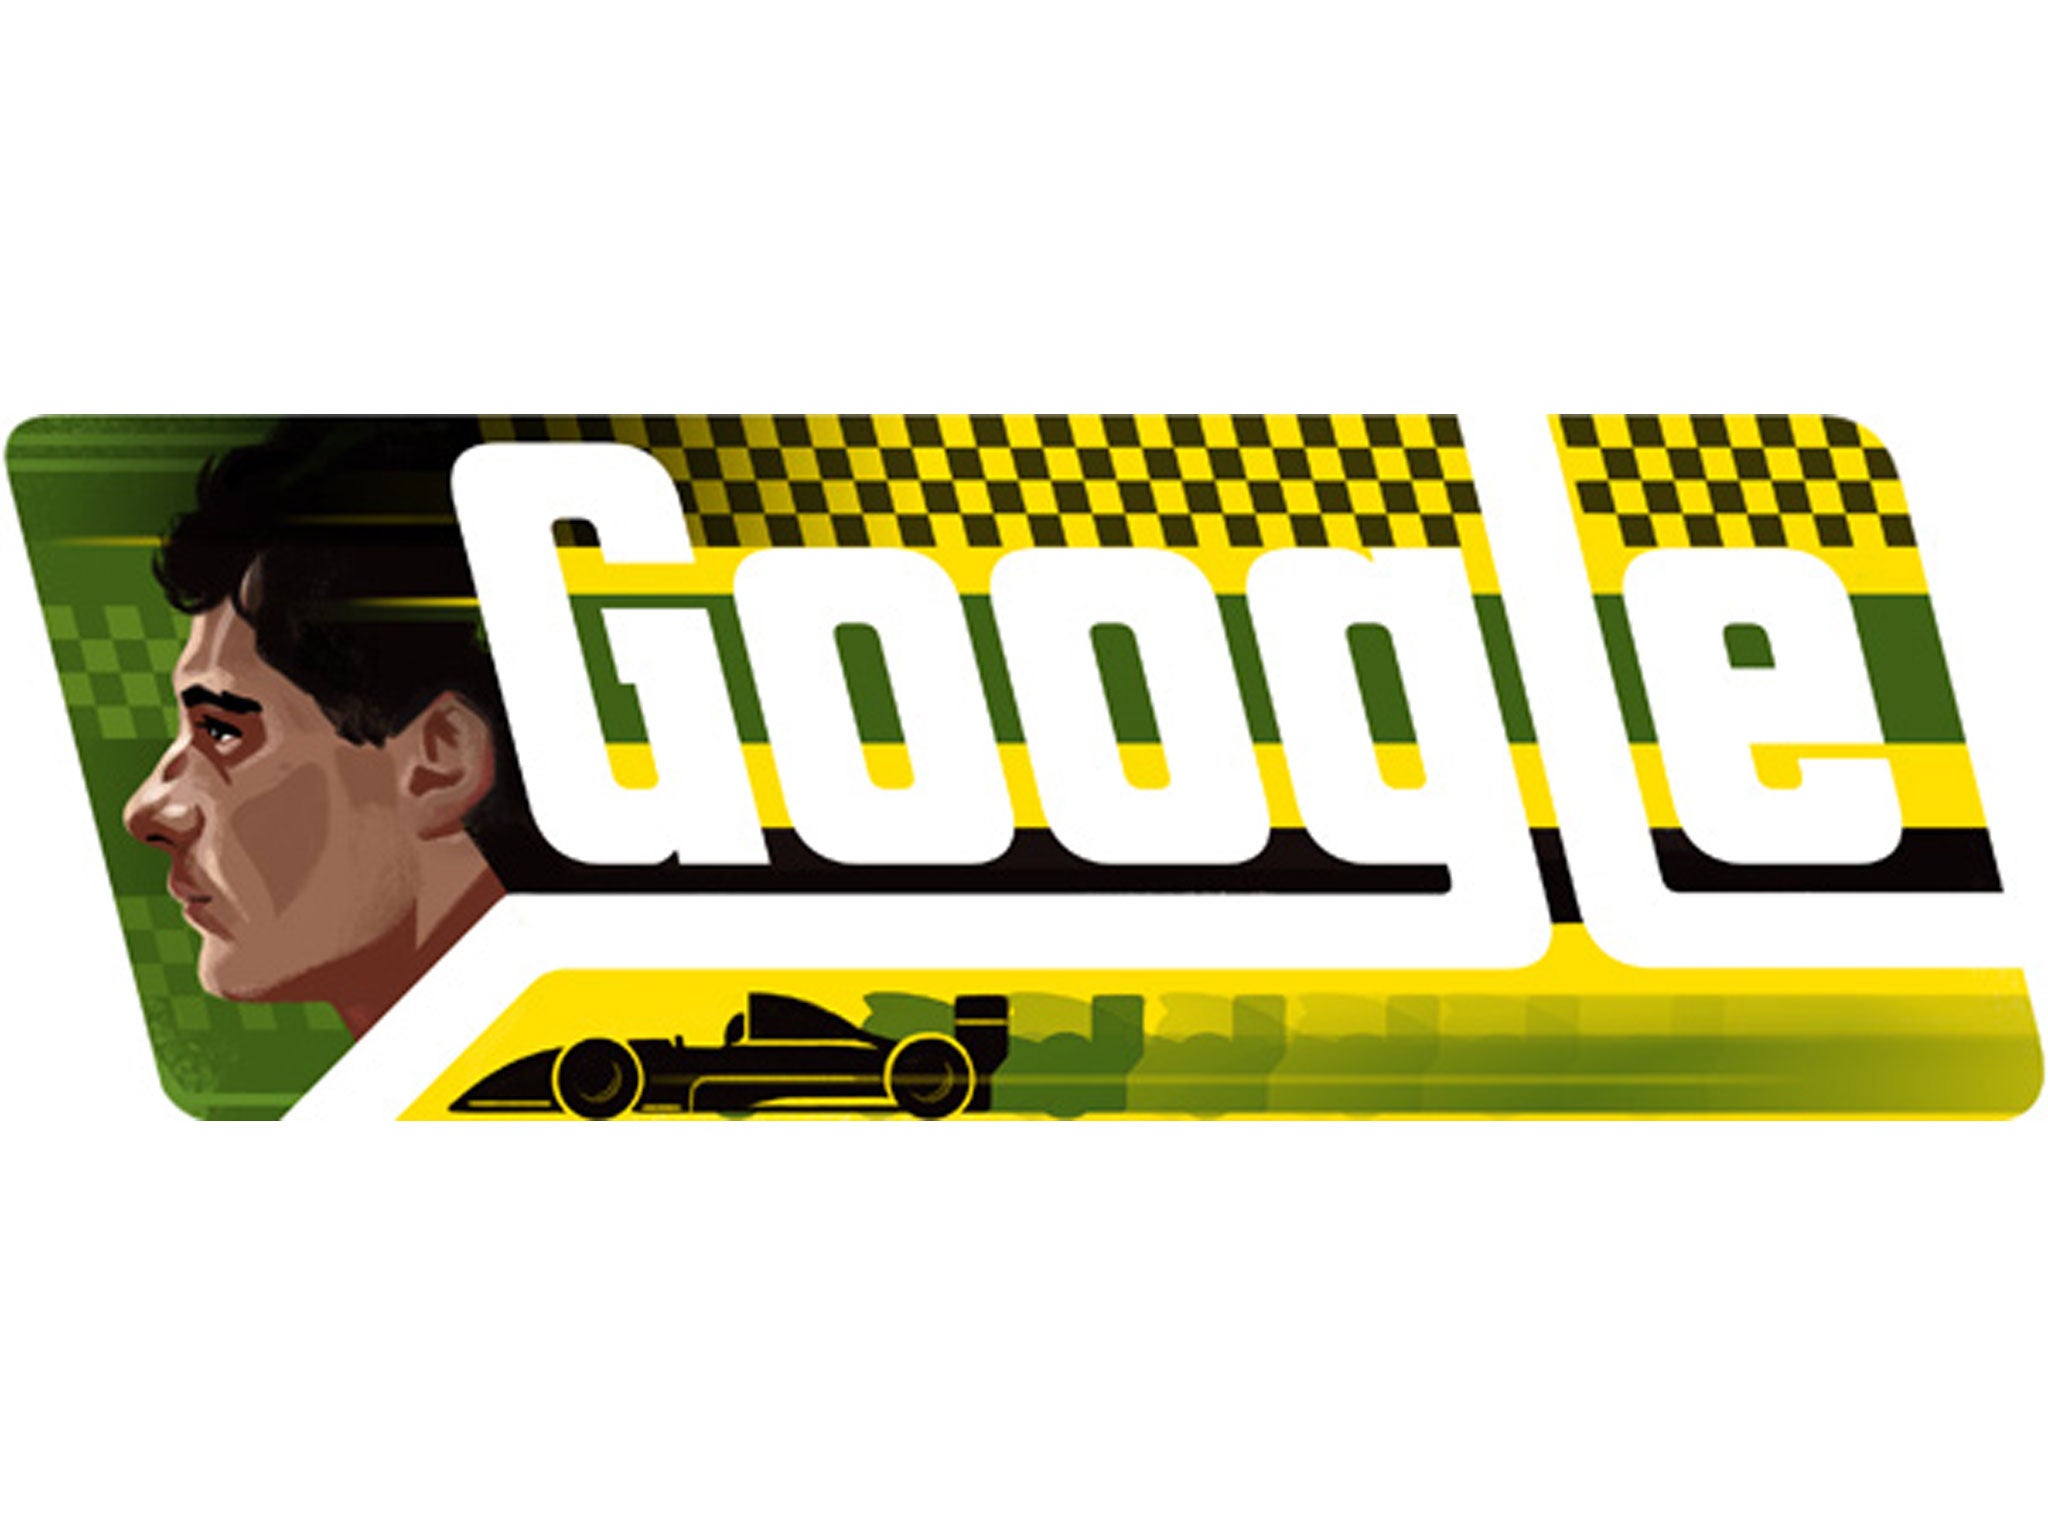 Google has celebrated what would have been Ayrton Senna's 54th birthday with its latest doodle